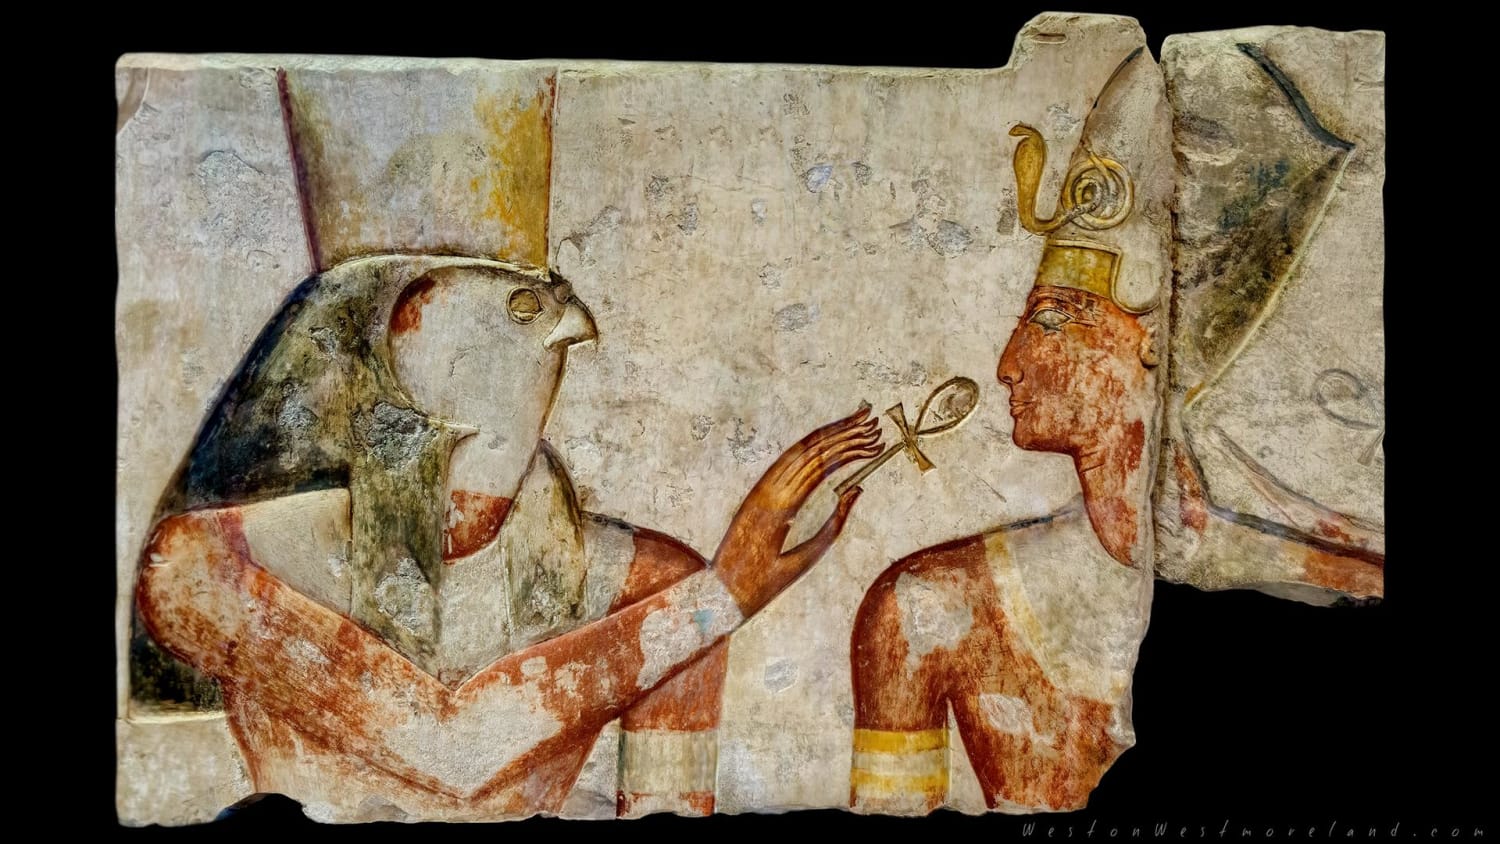 Horus and Ramses II, Abydos, Egypt. 1275 BC, Louvre